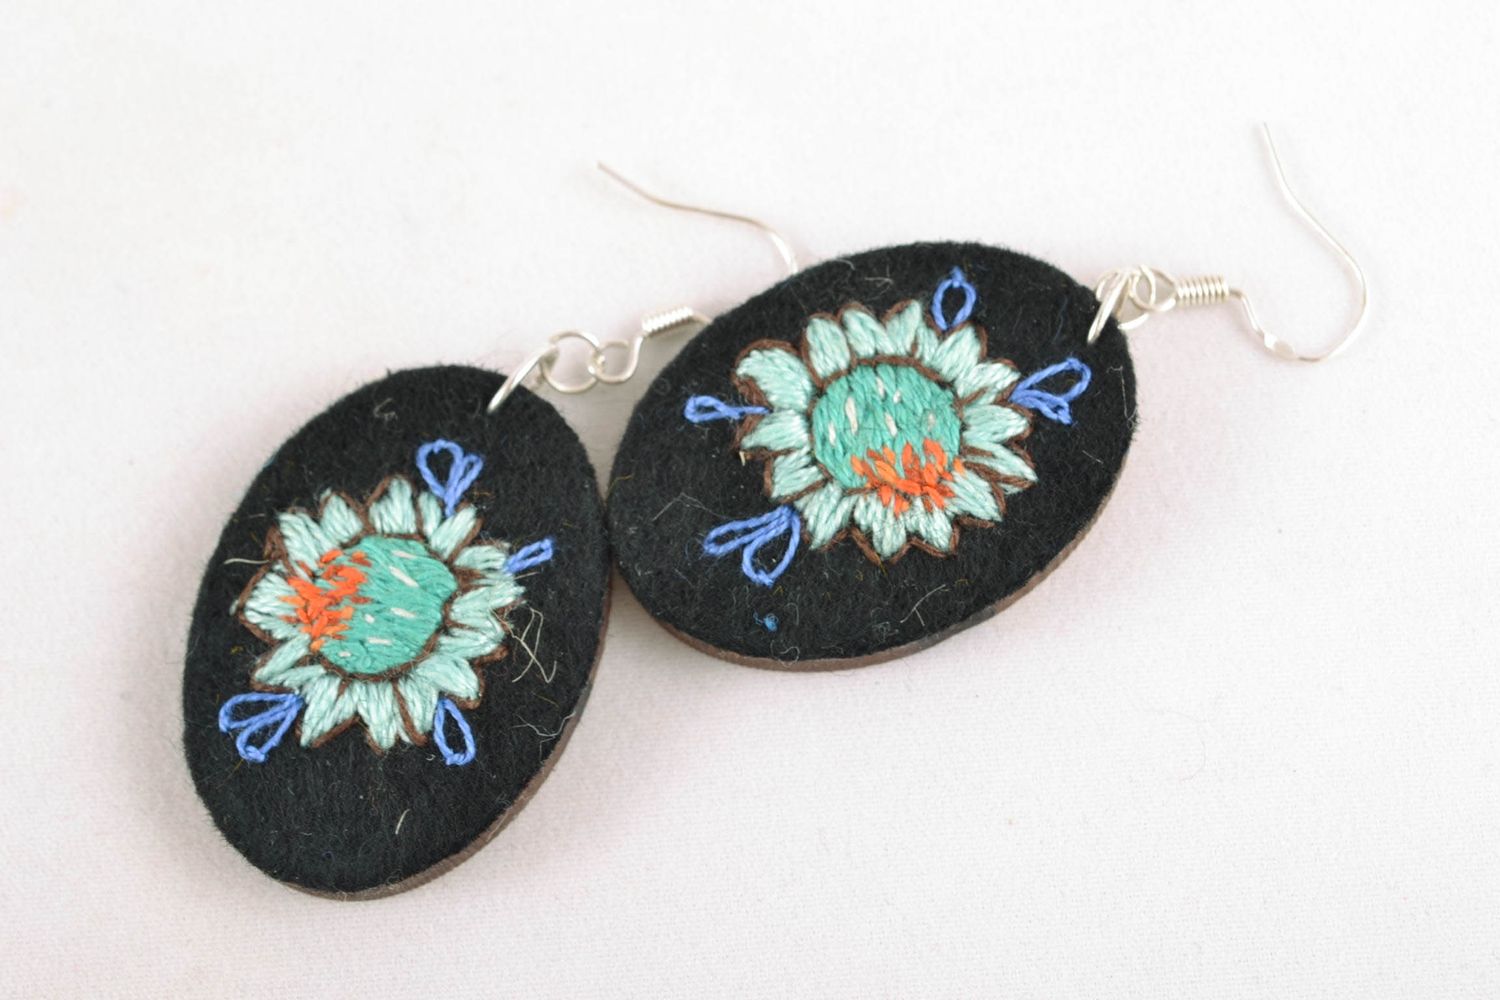 Oval earrings made of wood and felt with embroidery photo 4